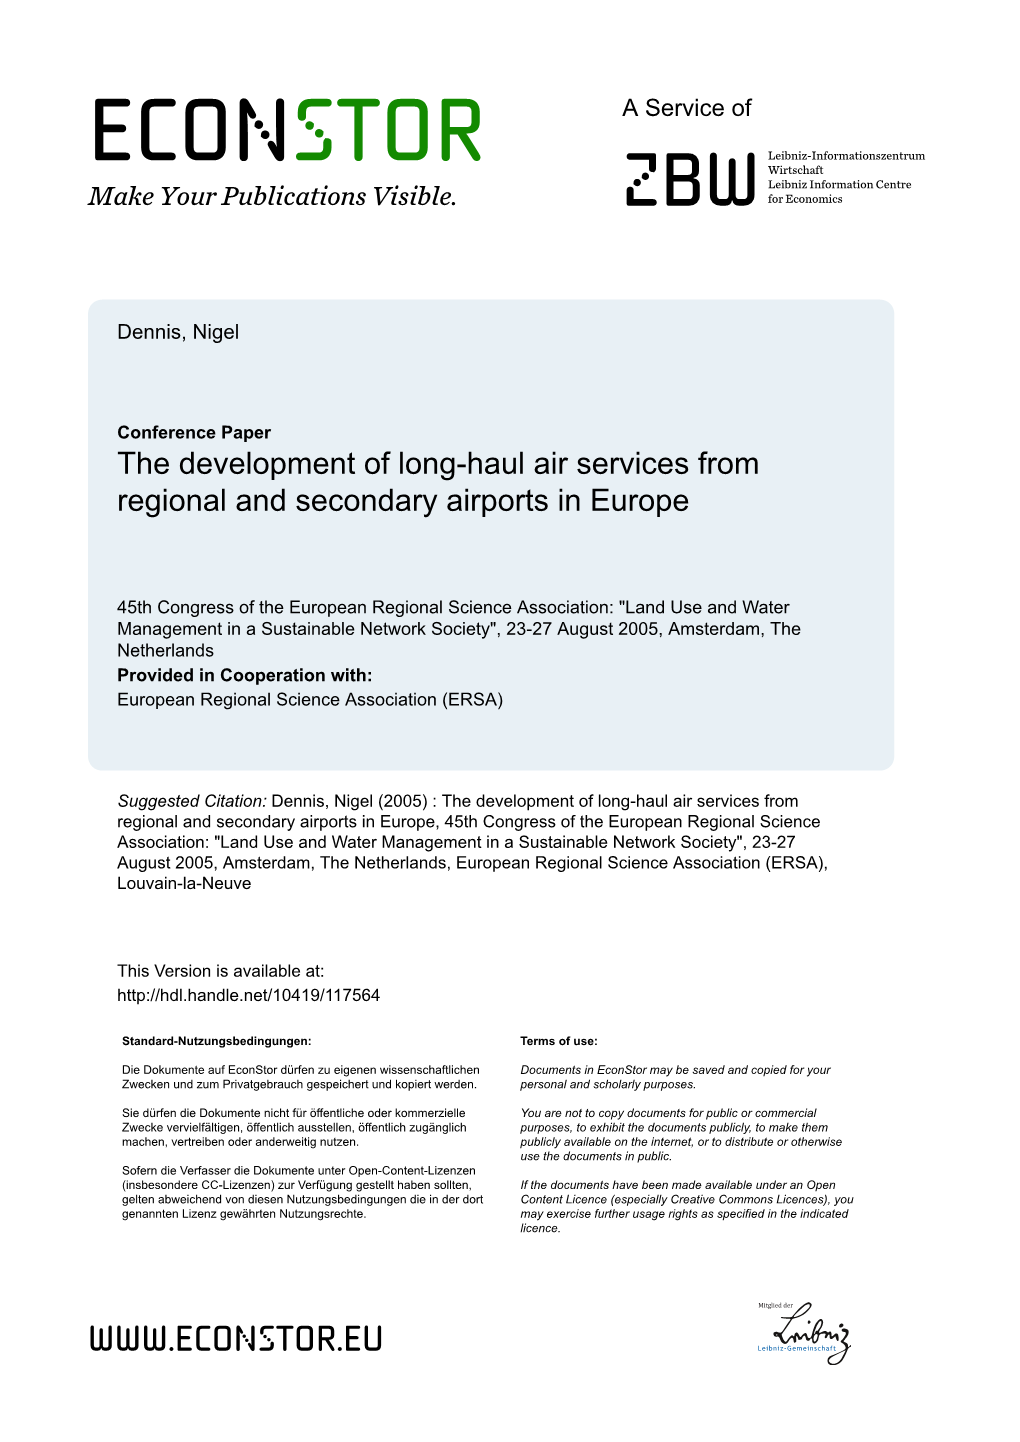 The Development of Long-Haul Air Services from Regional and Secondary Airports in Europe